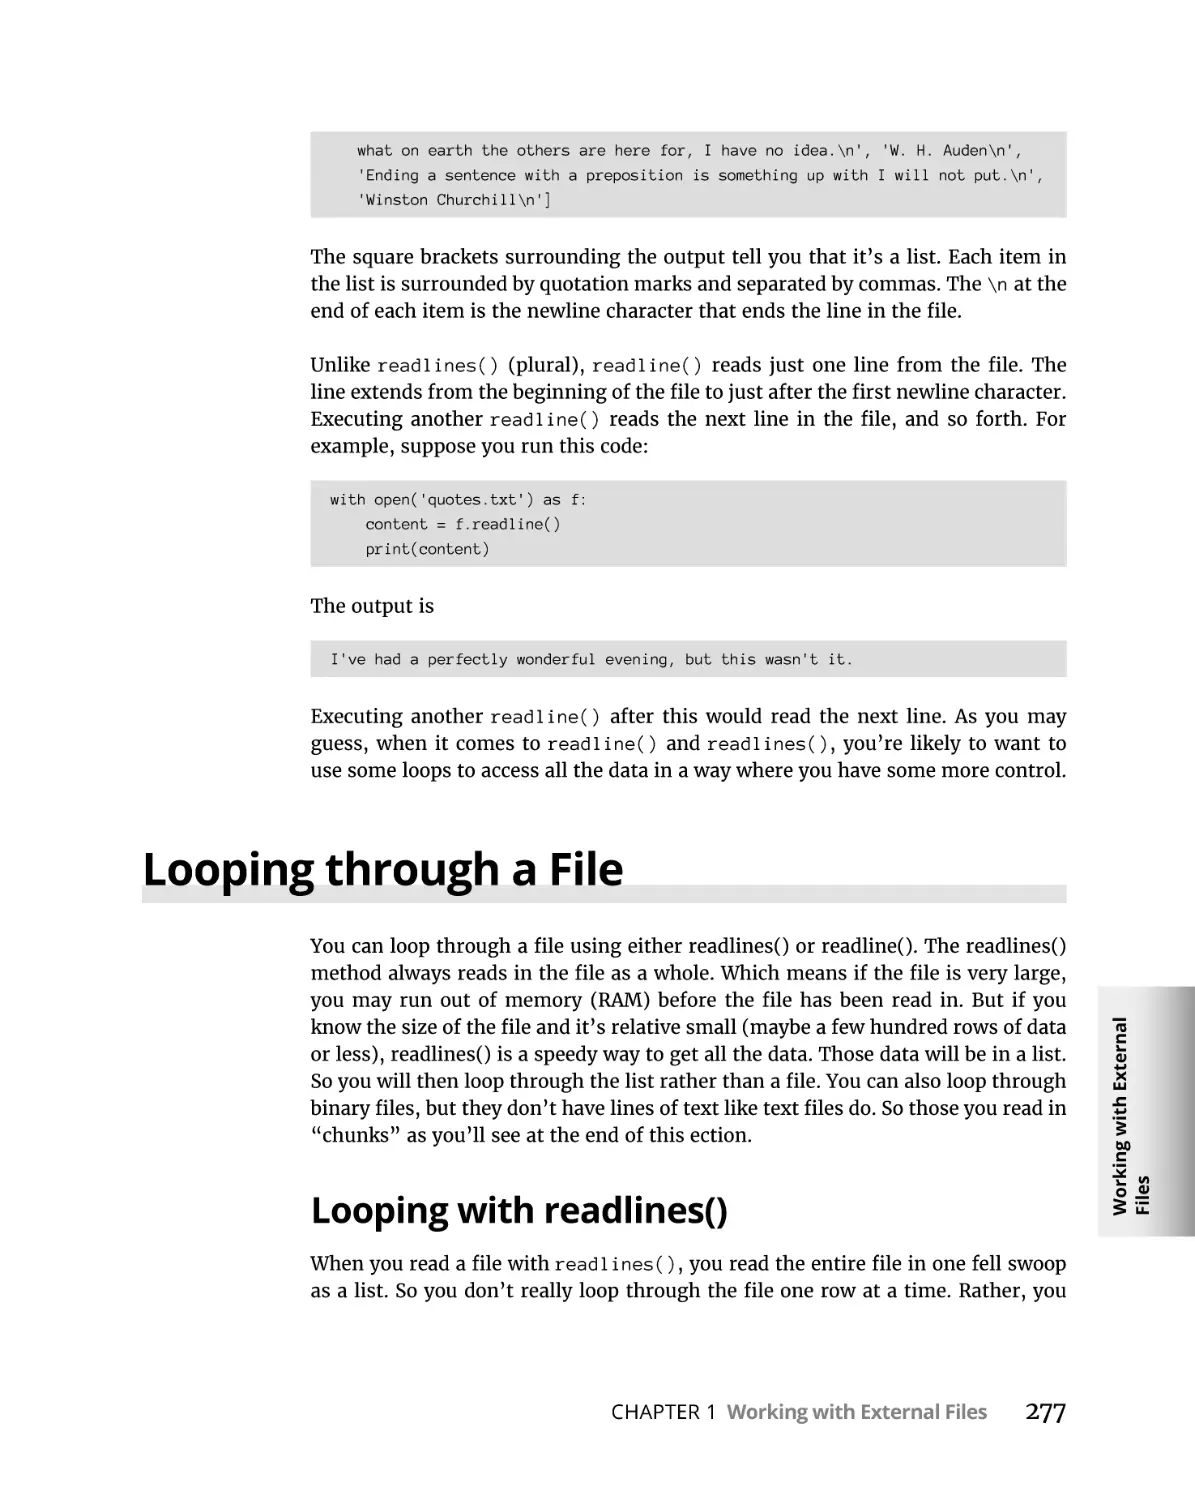 Looping through a File
Looping with readlines()